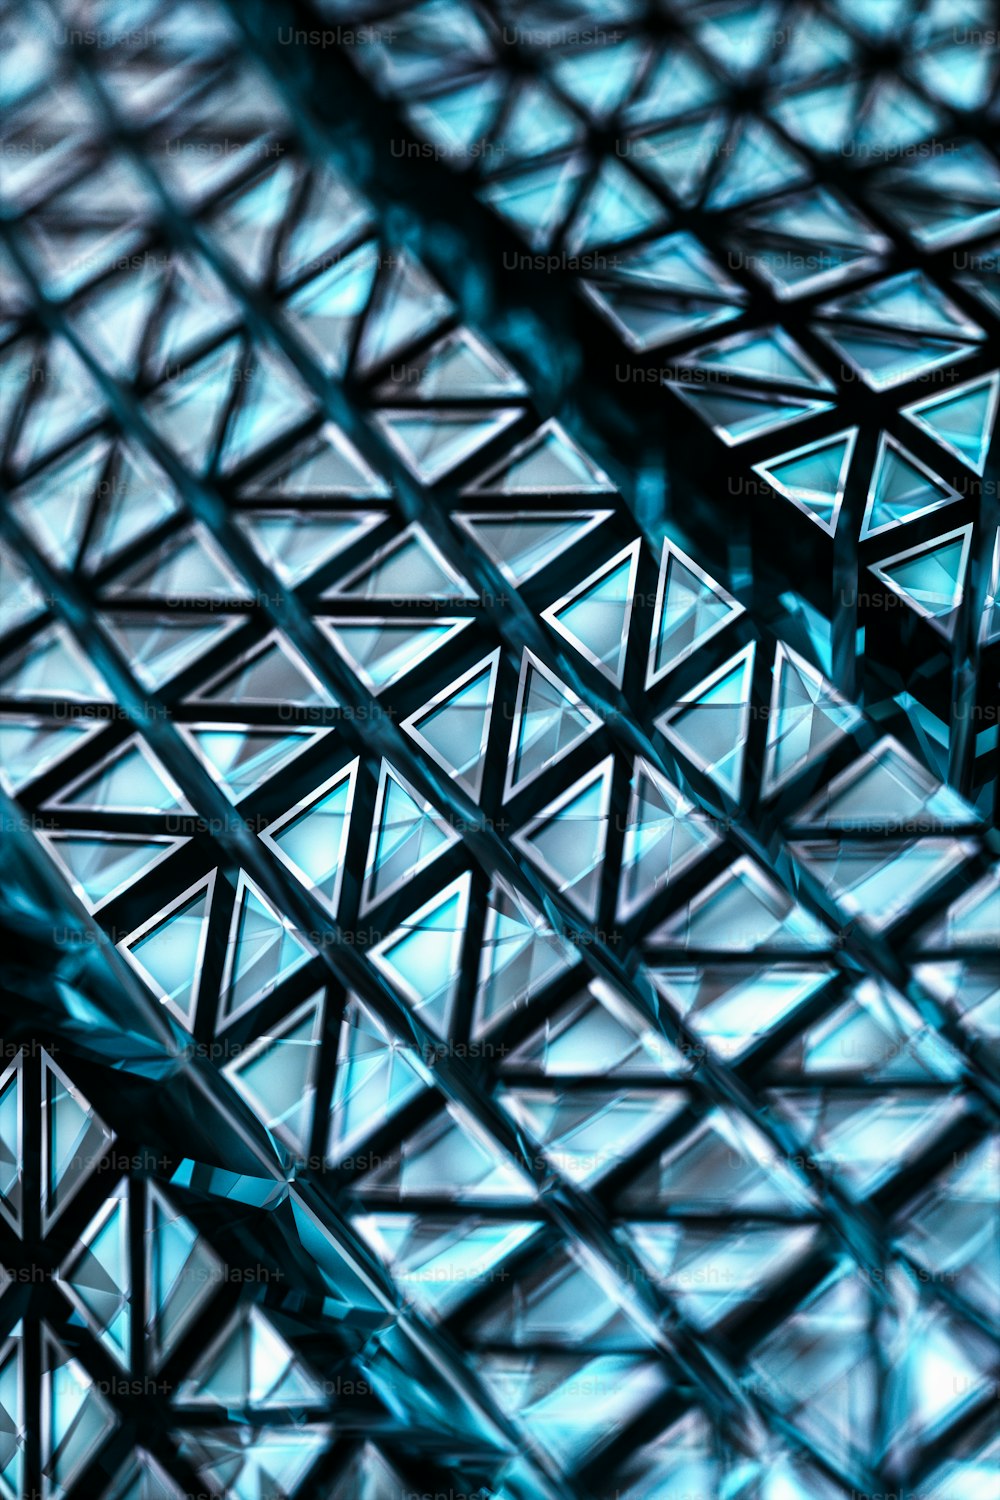 a close up view of a glass structure